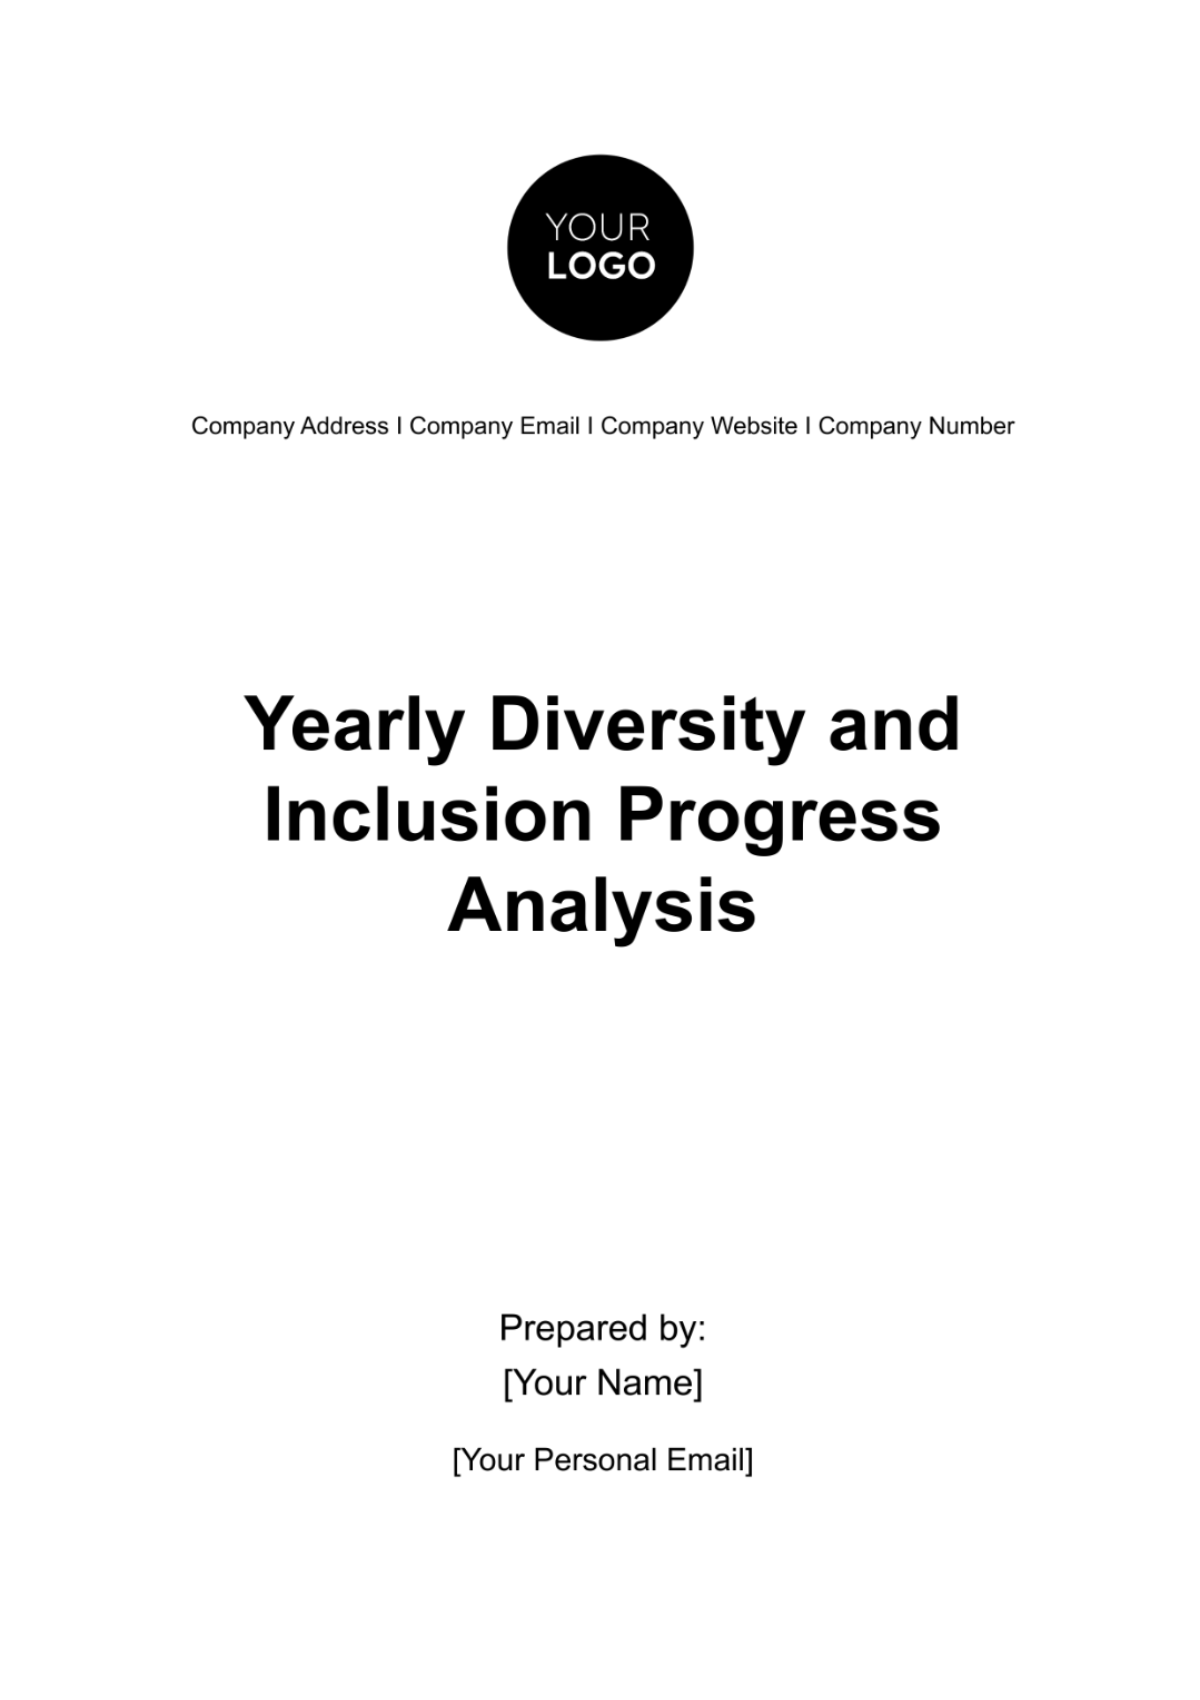 Yearly Diversity and Inclusion Progress Analysis HR Template